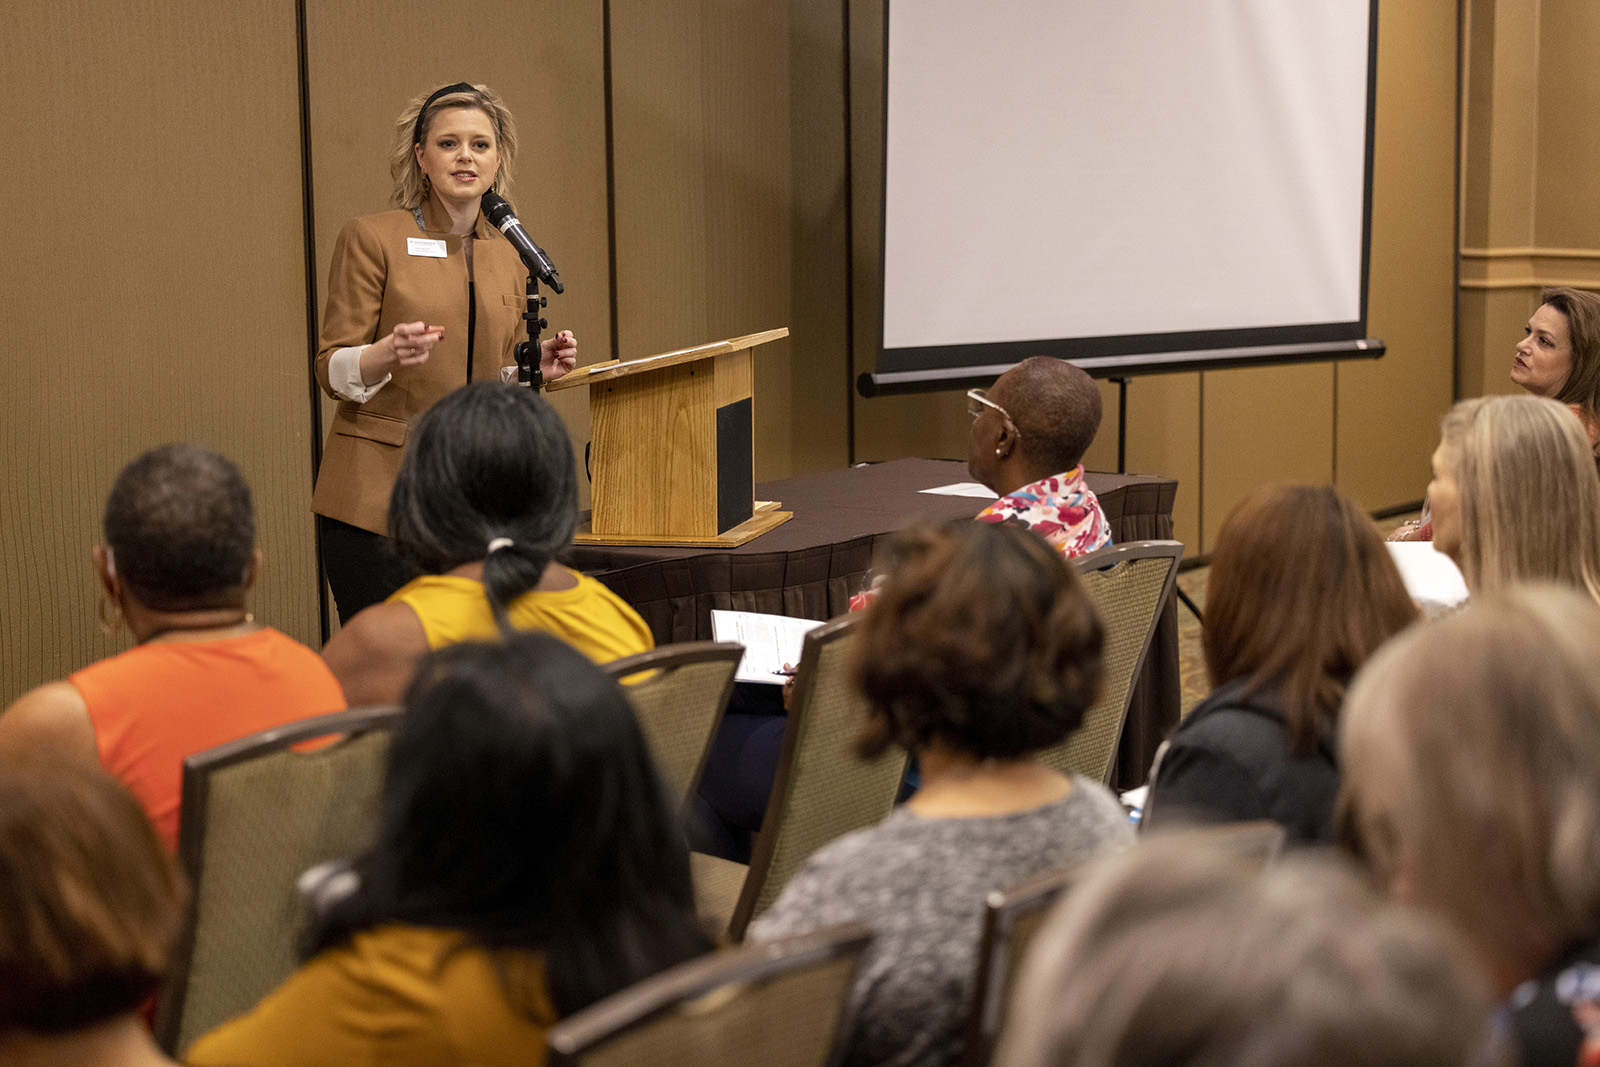 In this photo provided by Jerry Neil Williams of Texas Baptist, Katie McCoy lectures at the 2021 Texas Baptist Annual Meeting in Galveston, Texas, on Nov. 16, 2021. McCoy led a workshop titled, "Beyond the Mask: Ministry to Women in a Post-COVID World." (Texas Baptist via AP)